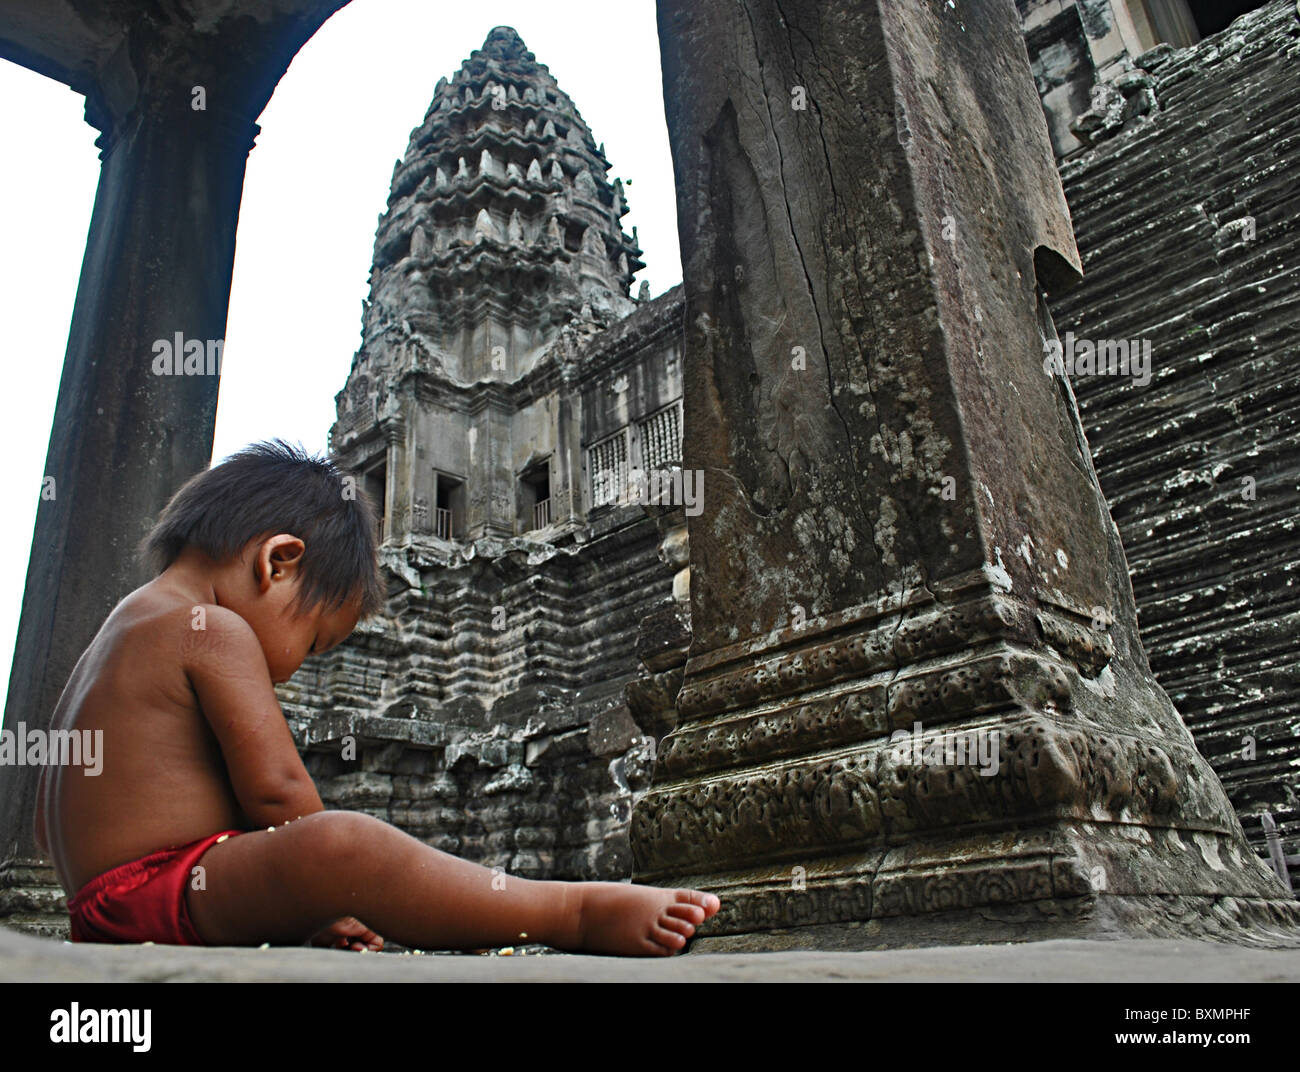 Baby sitting in Angkor Wat temple, Siem Reap, Cambodia Stock Photo